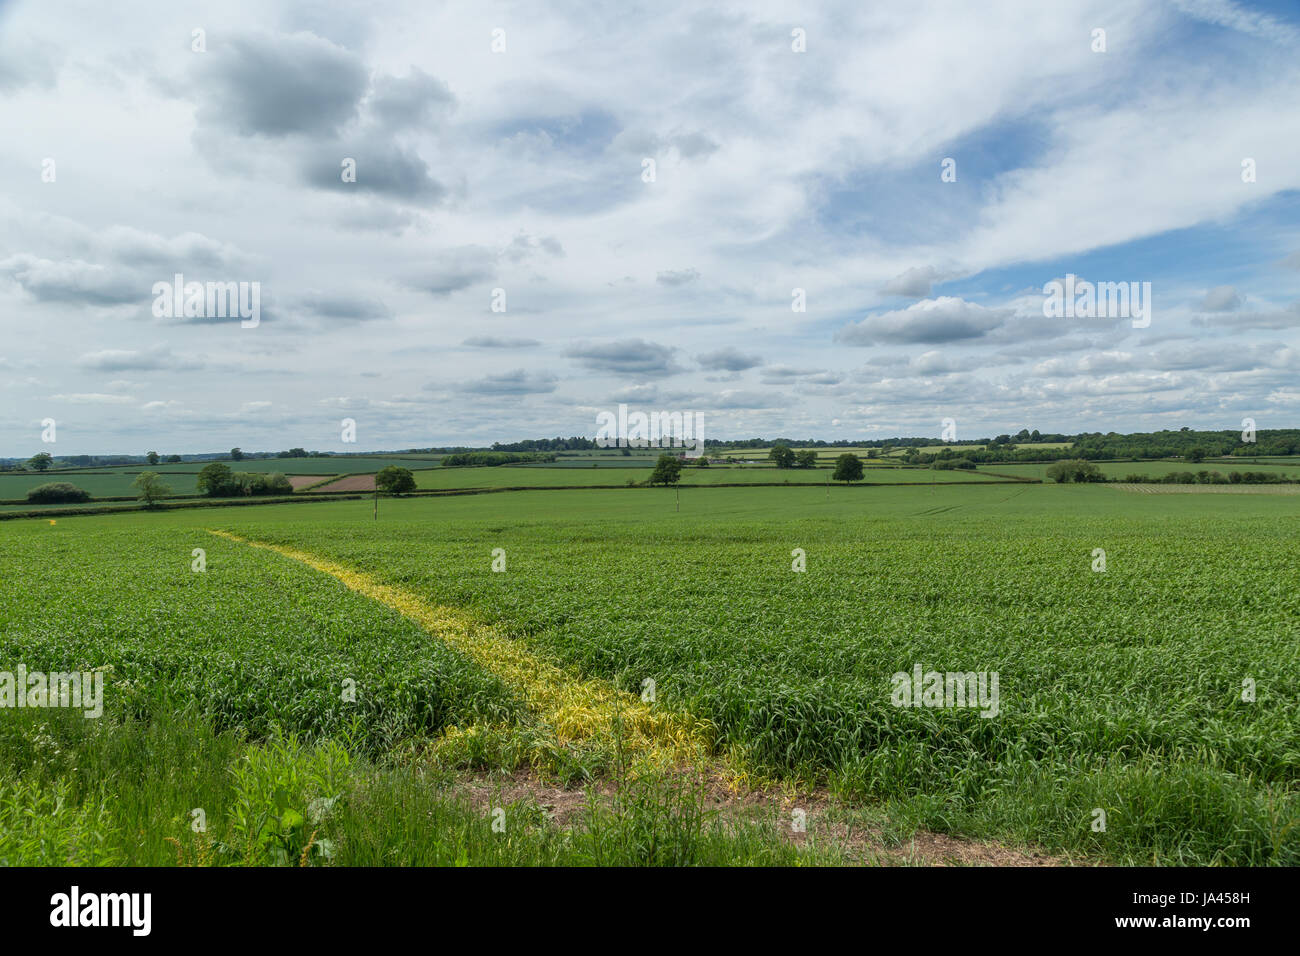 A green field of growing crops with a track or path crossing it for walkers to use. The sky is blue with white clouds in summer. Stock Photo